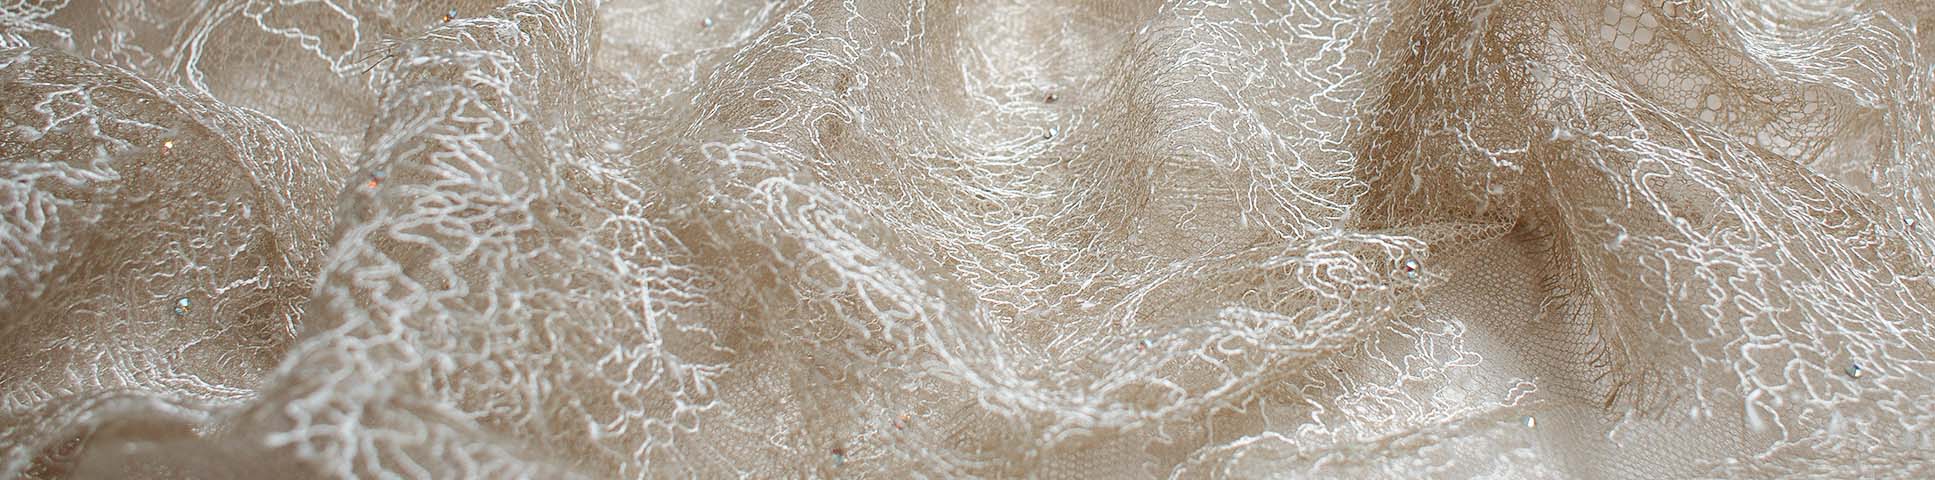 Chantilly embroidered tulle